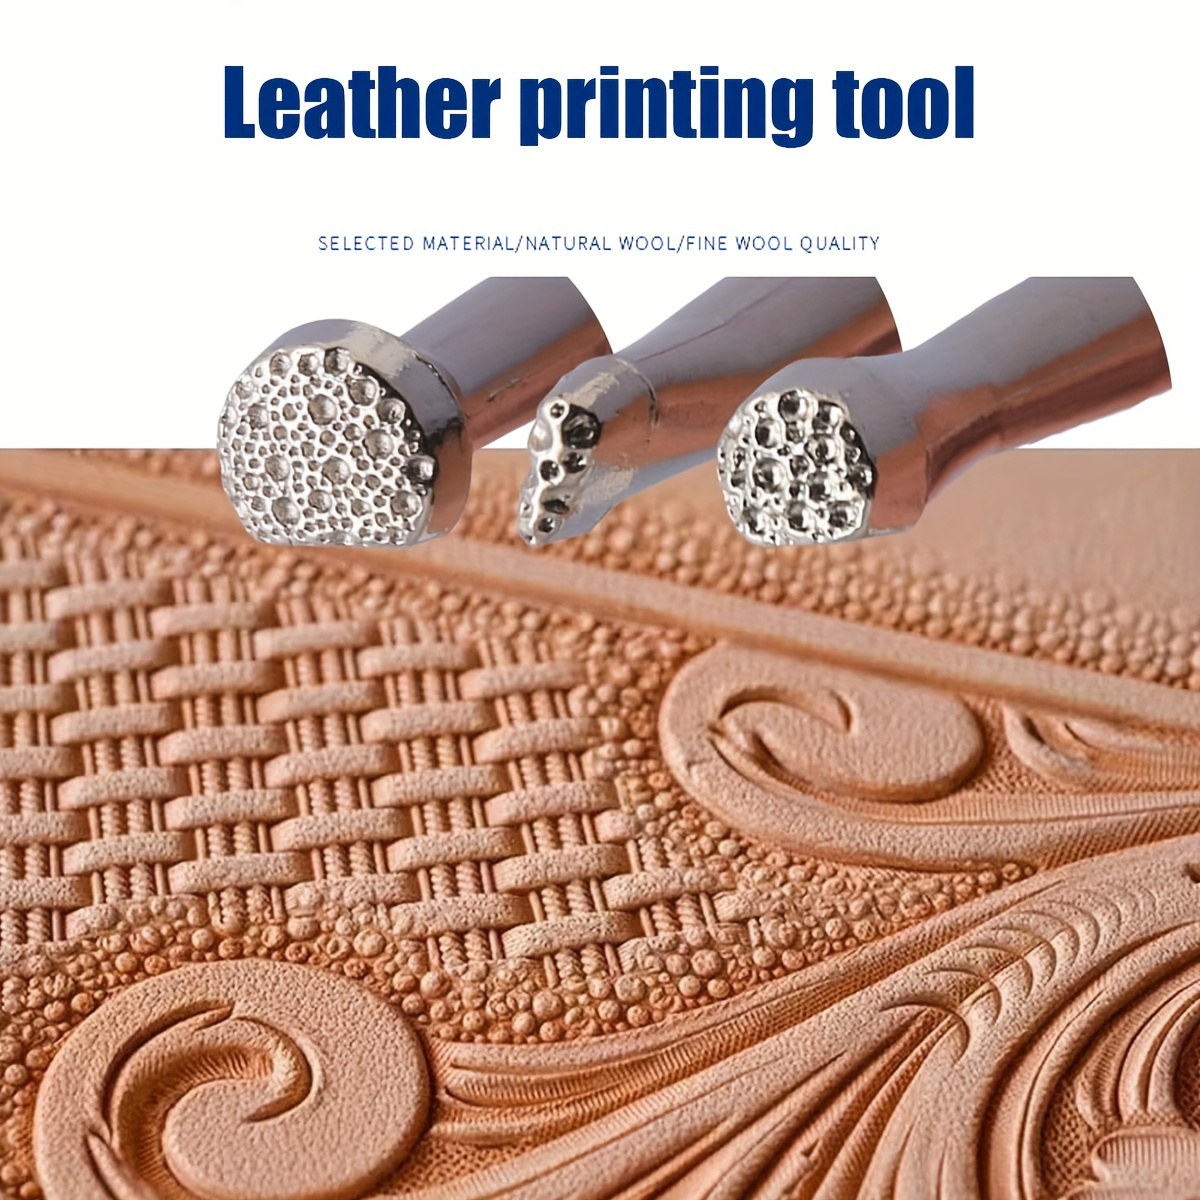  Leather Craft Tools, 60 Pieces Leather Working Tools and  Supplies with Storage Bag Cutting Mat Prong Punch Groover Edge Creaser  Stamping Carving Knife Awl Hammer for Leather Craft Making DIY Sewing